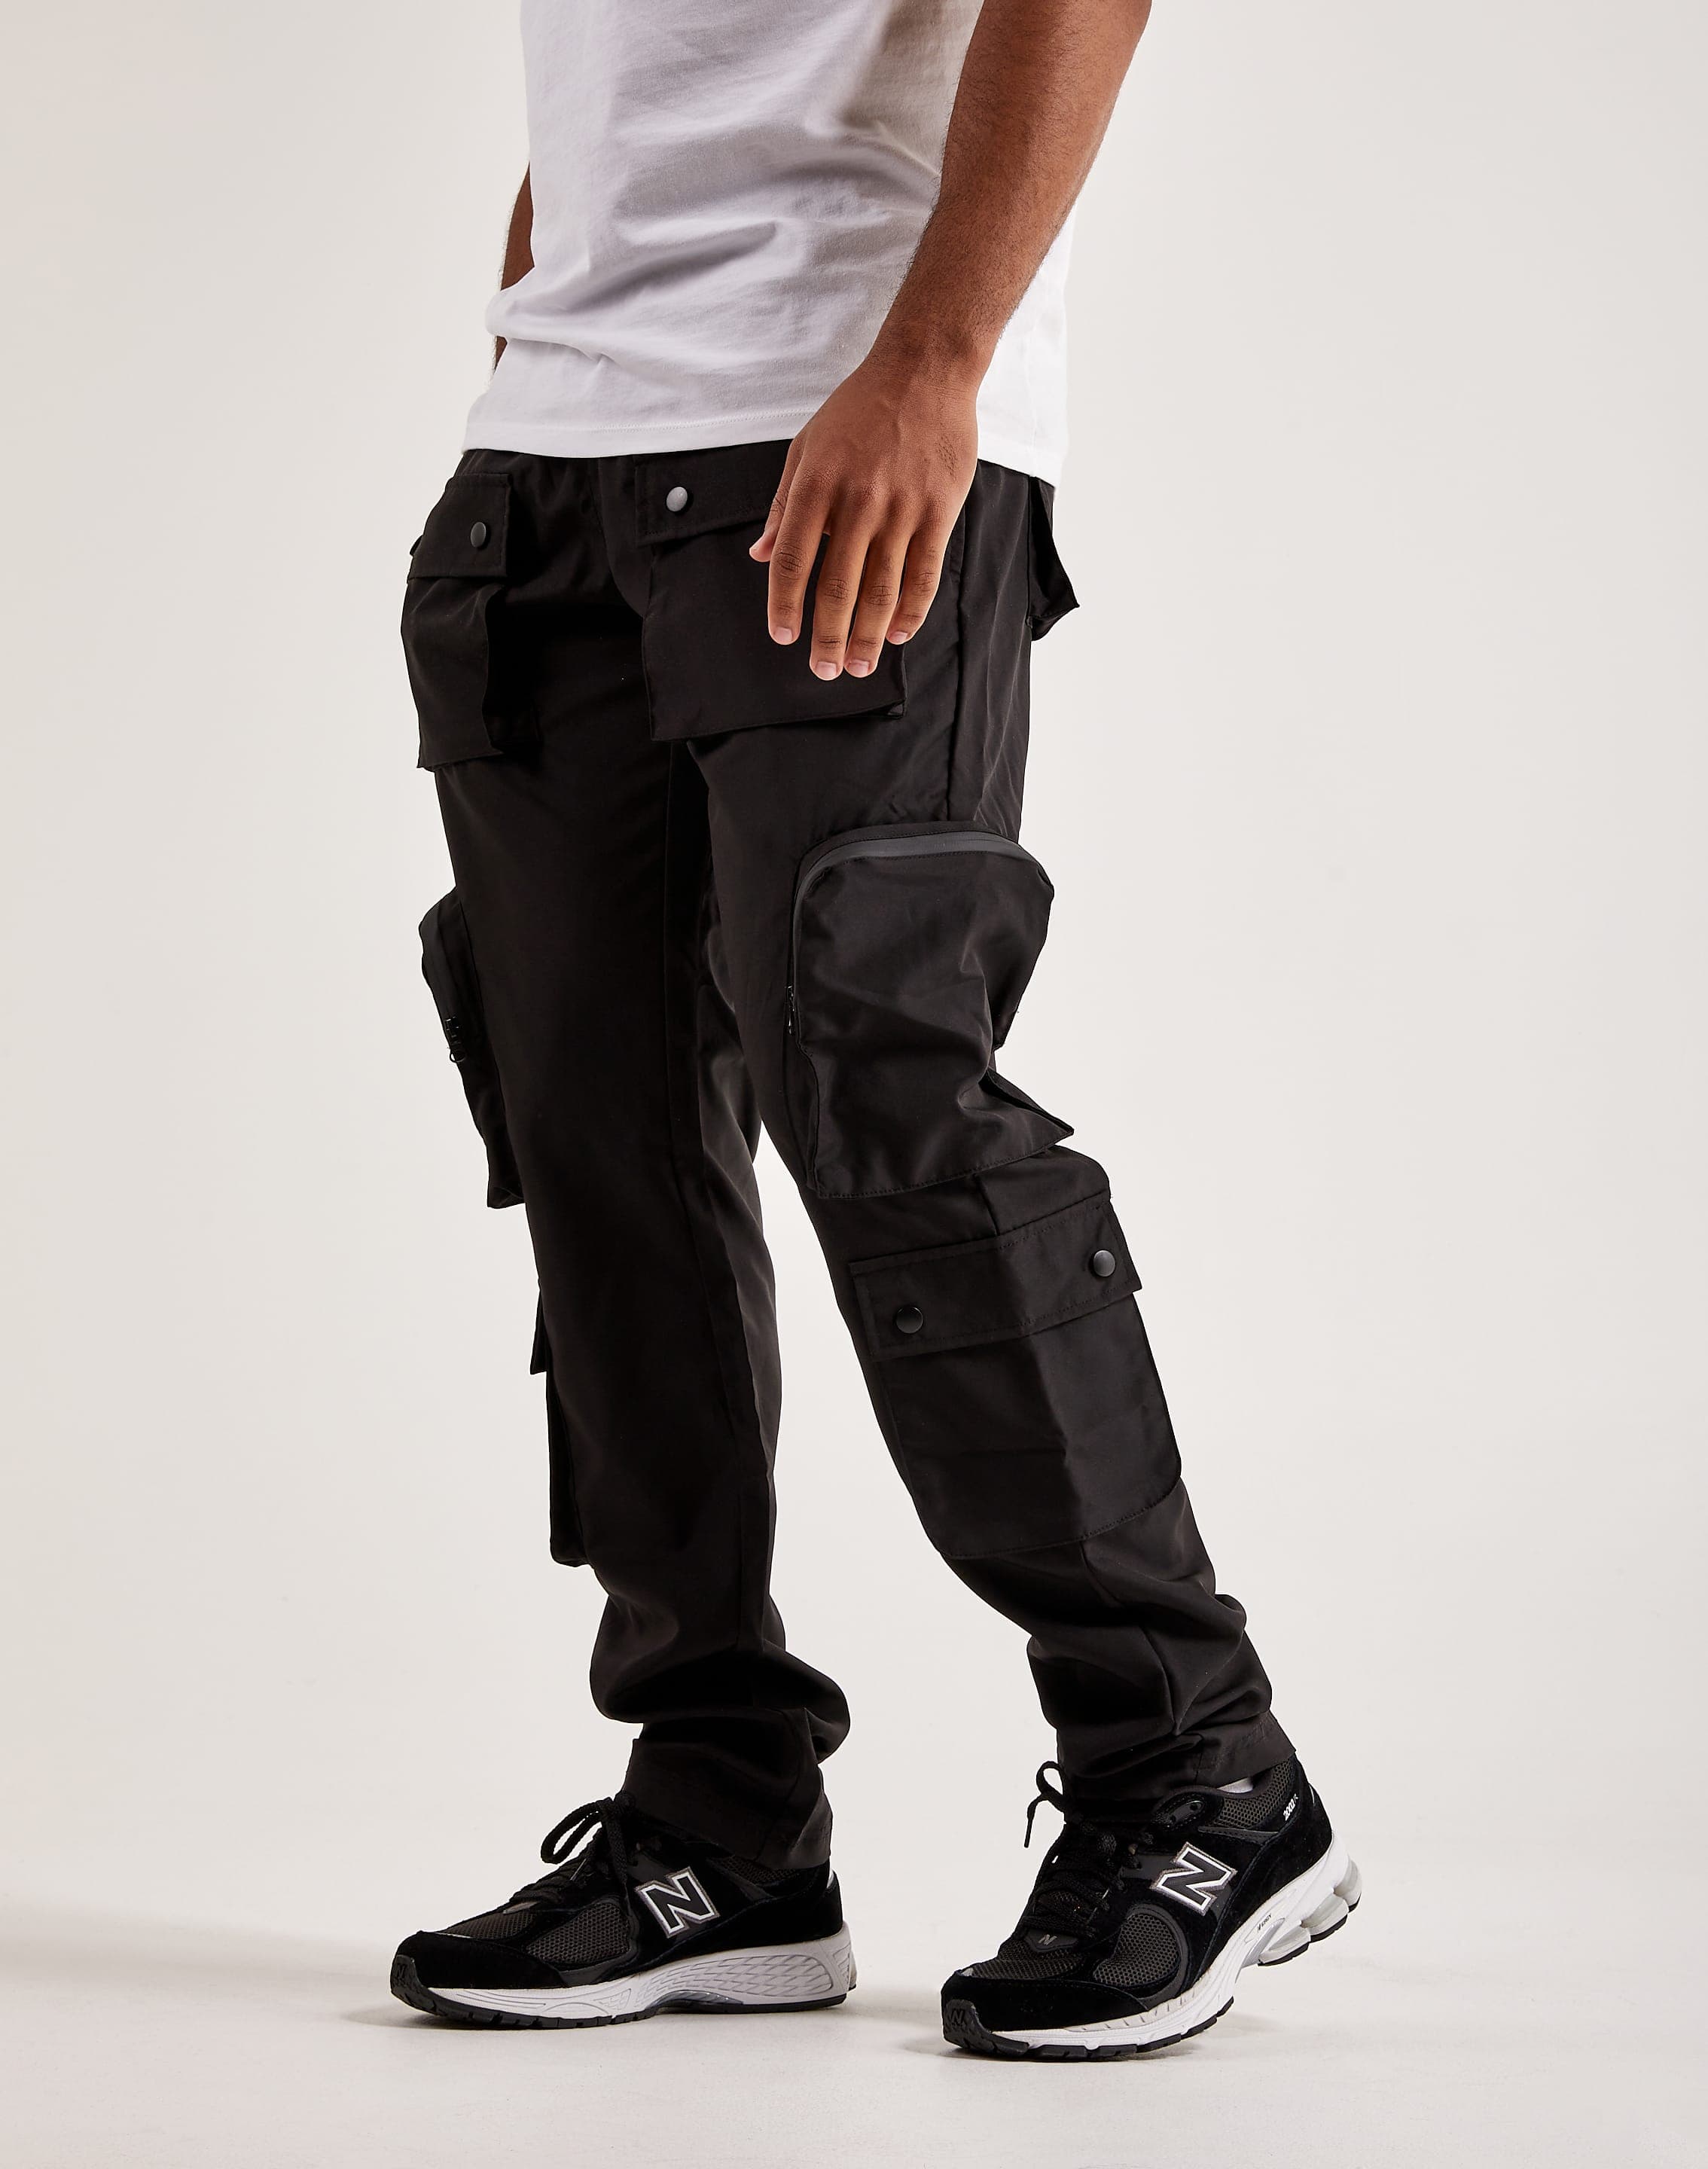 Taker Patchwork Twill Pants – DTLR